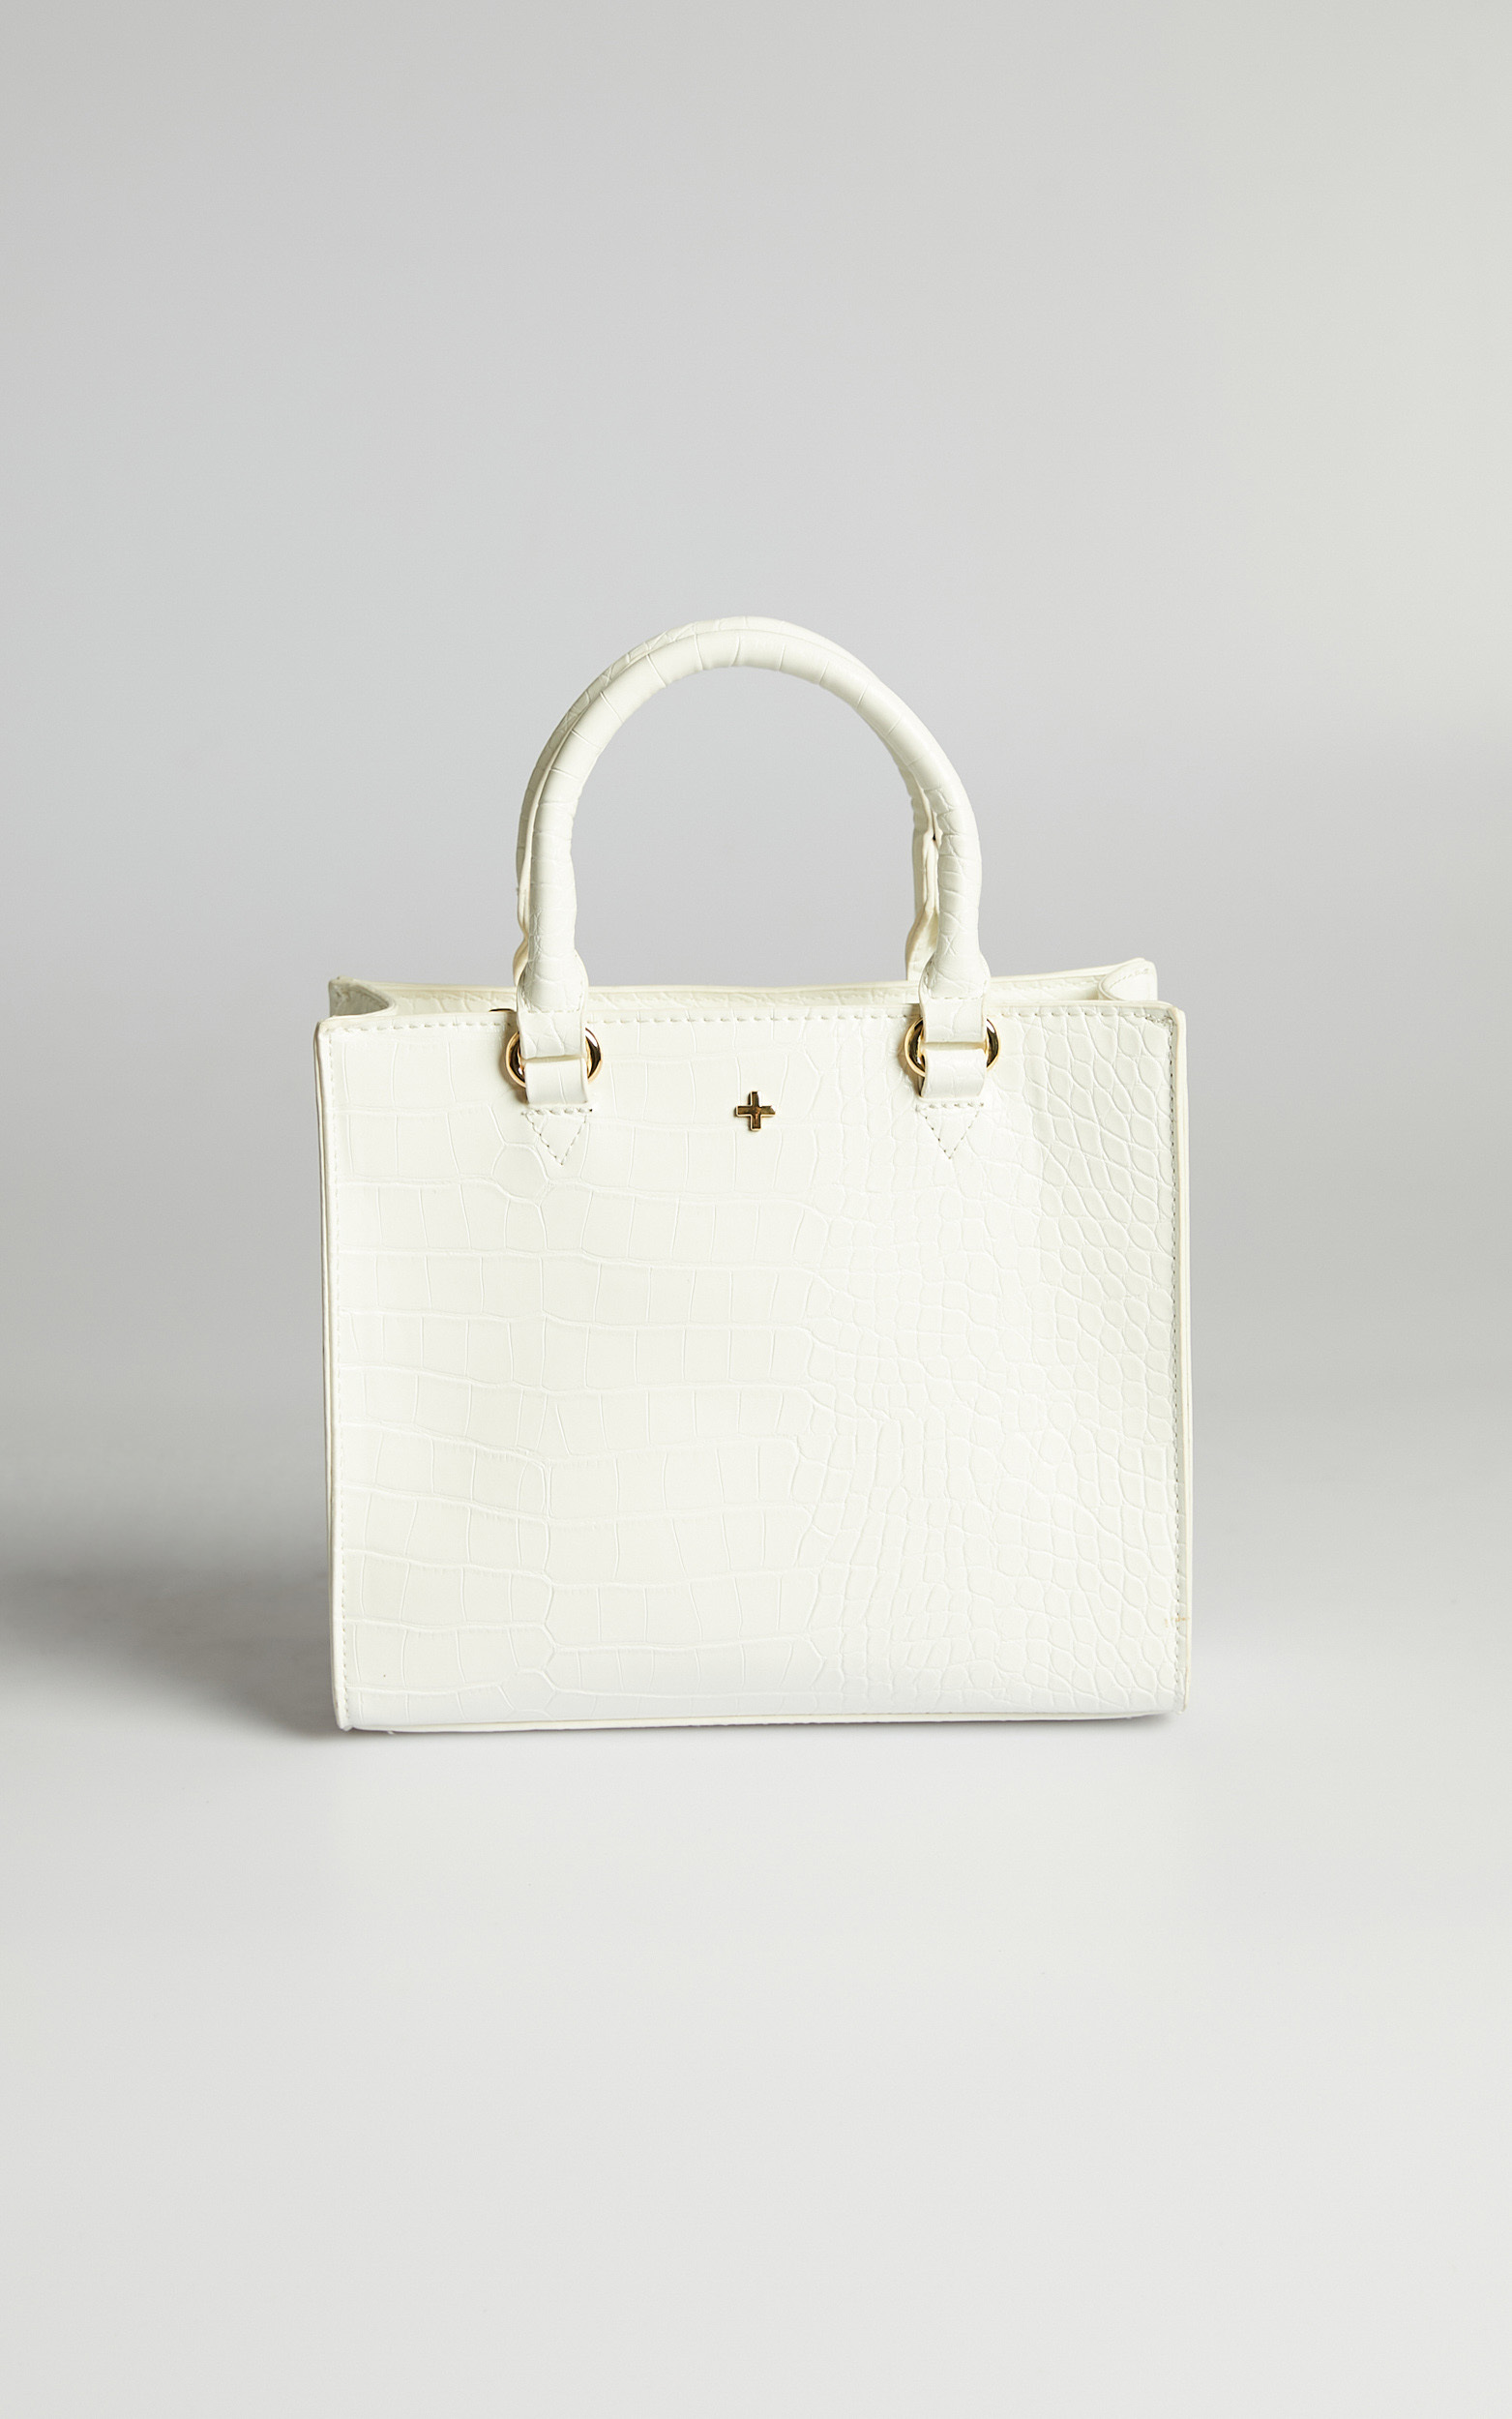 Peta and Jain - Lucca Bag in White Croc - NoSize, WHT1, hi-res image number null